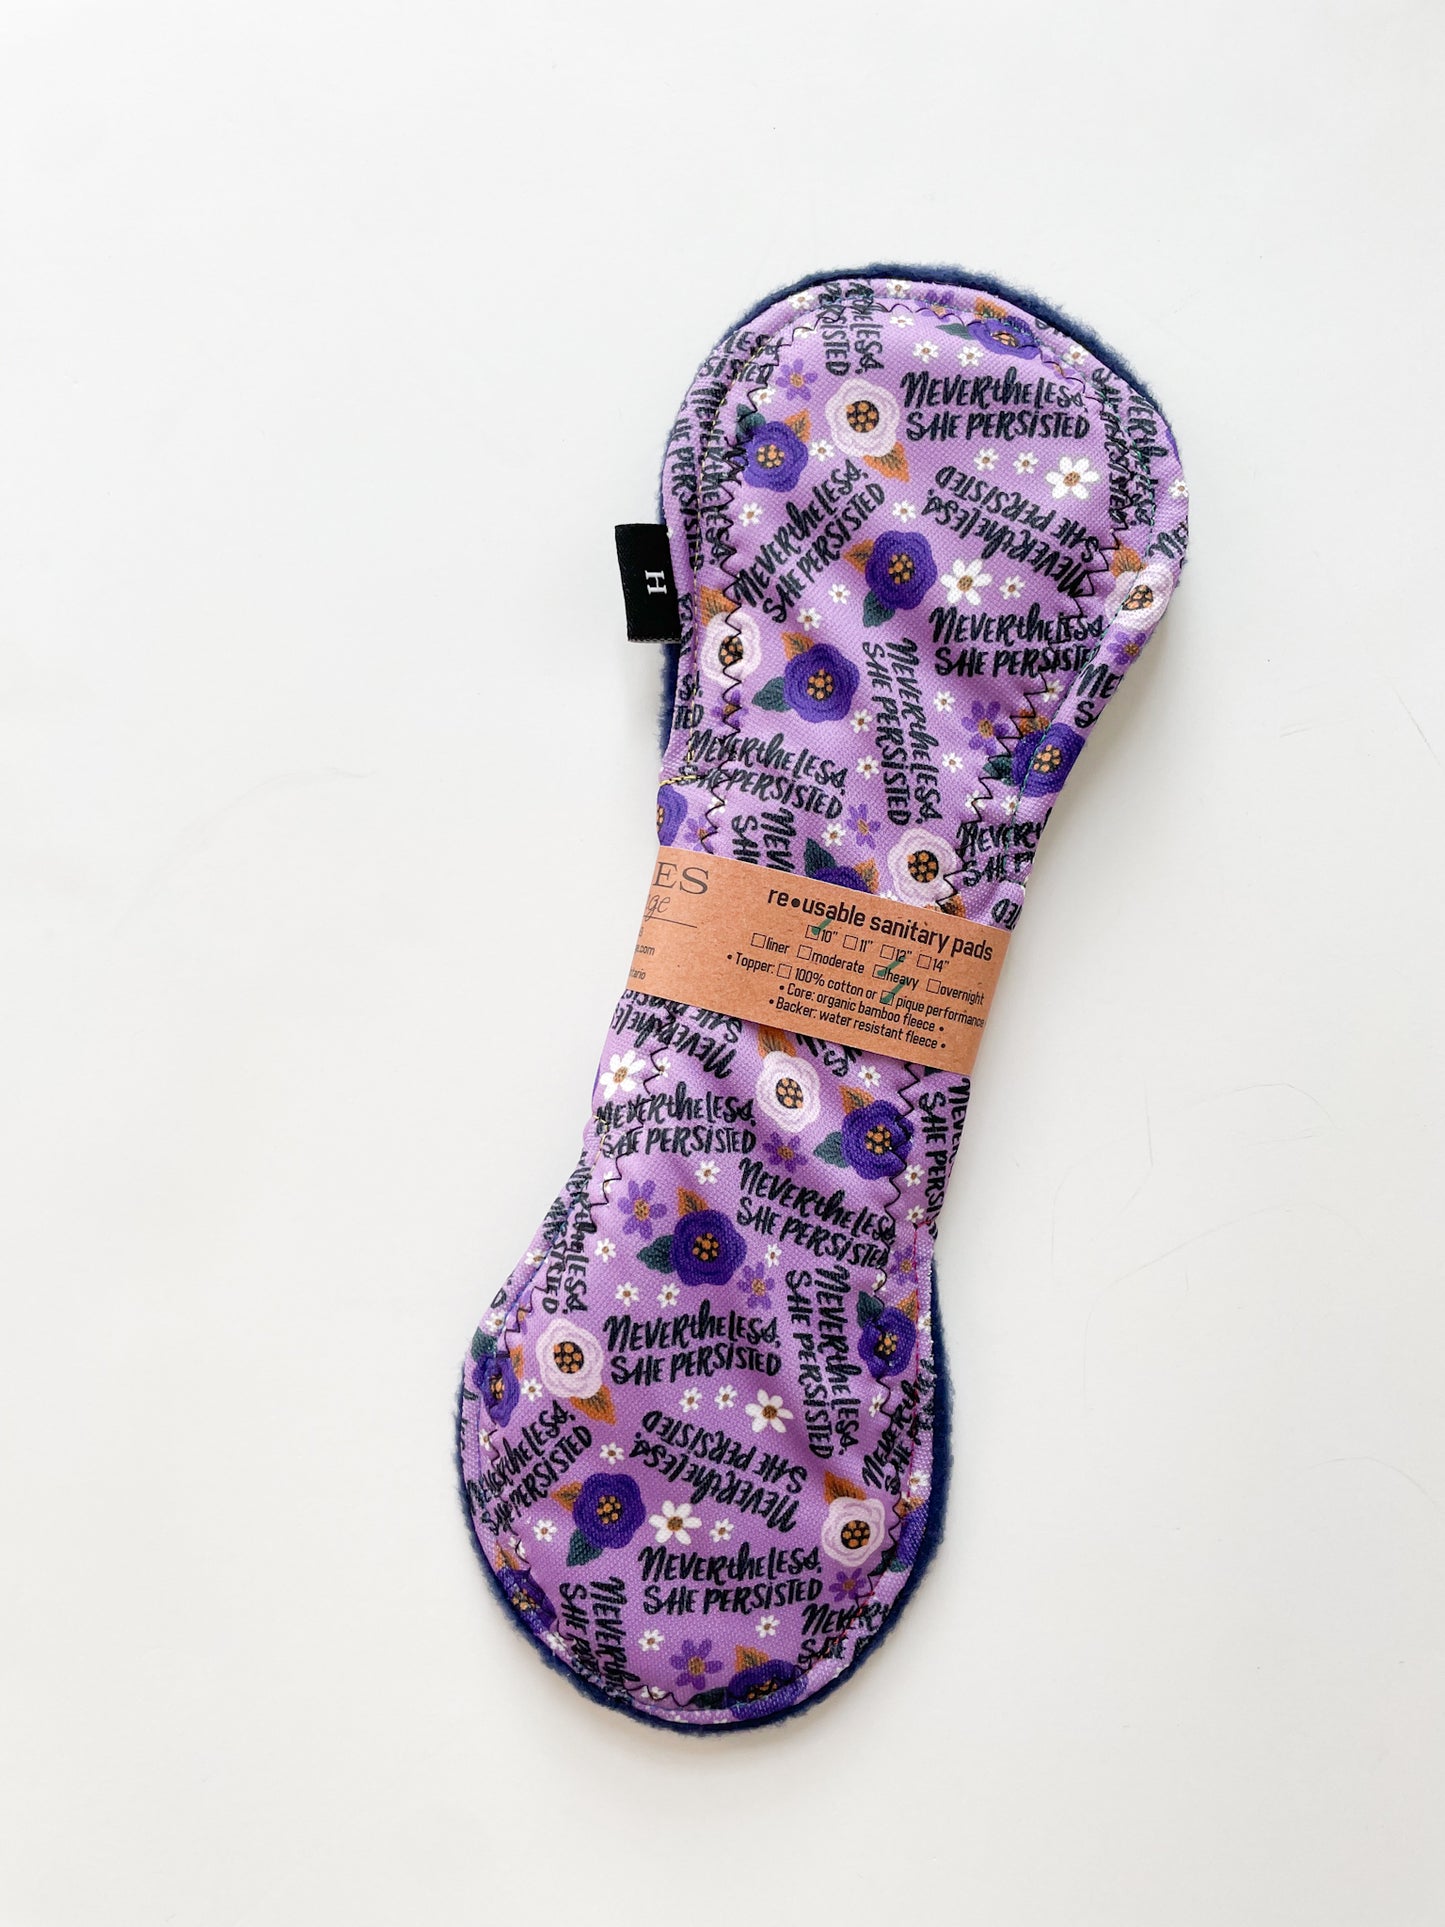 Reusable Period Pads - Heavy Absorbency - Purple "Nevertheless She Persisted"